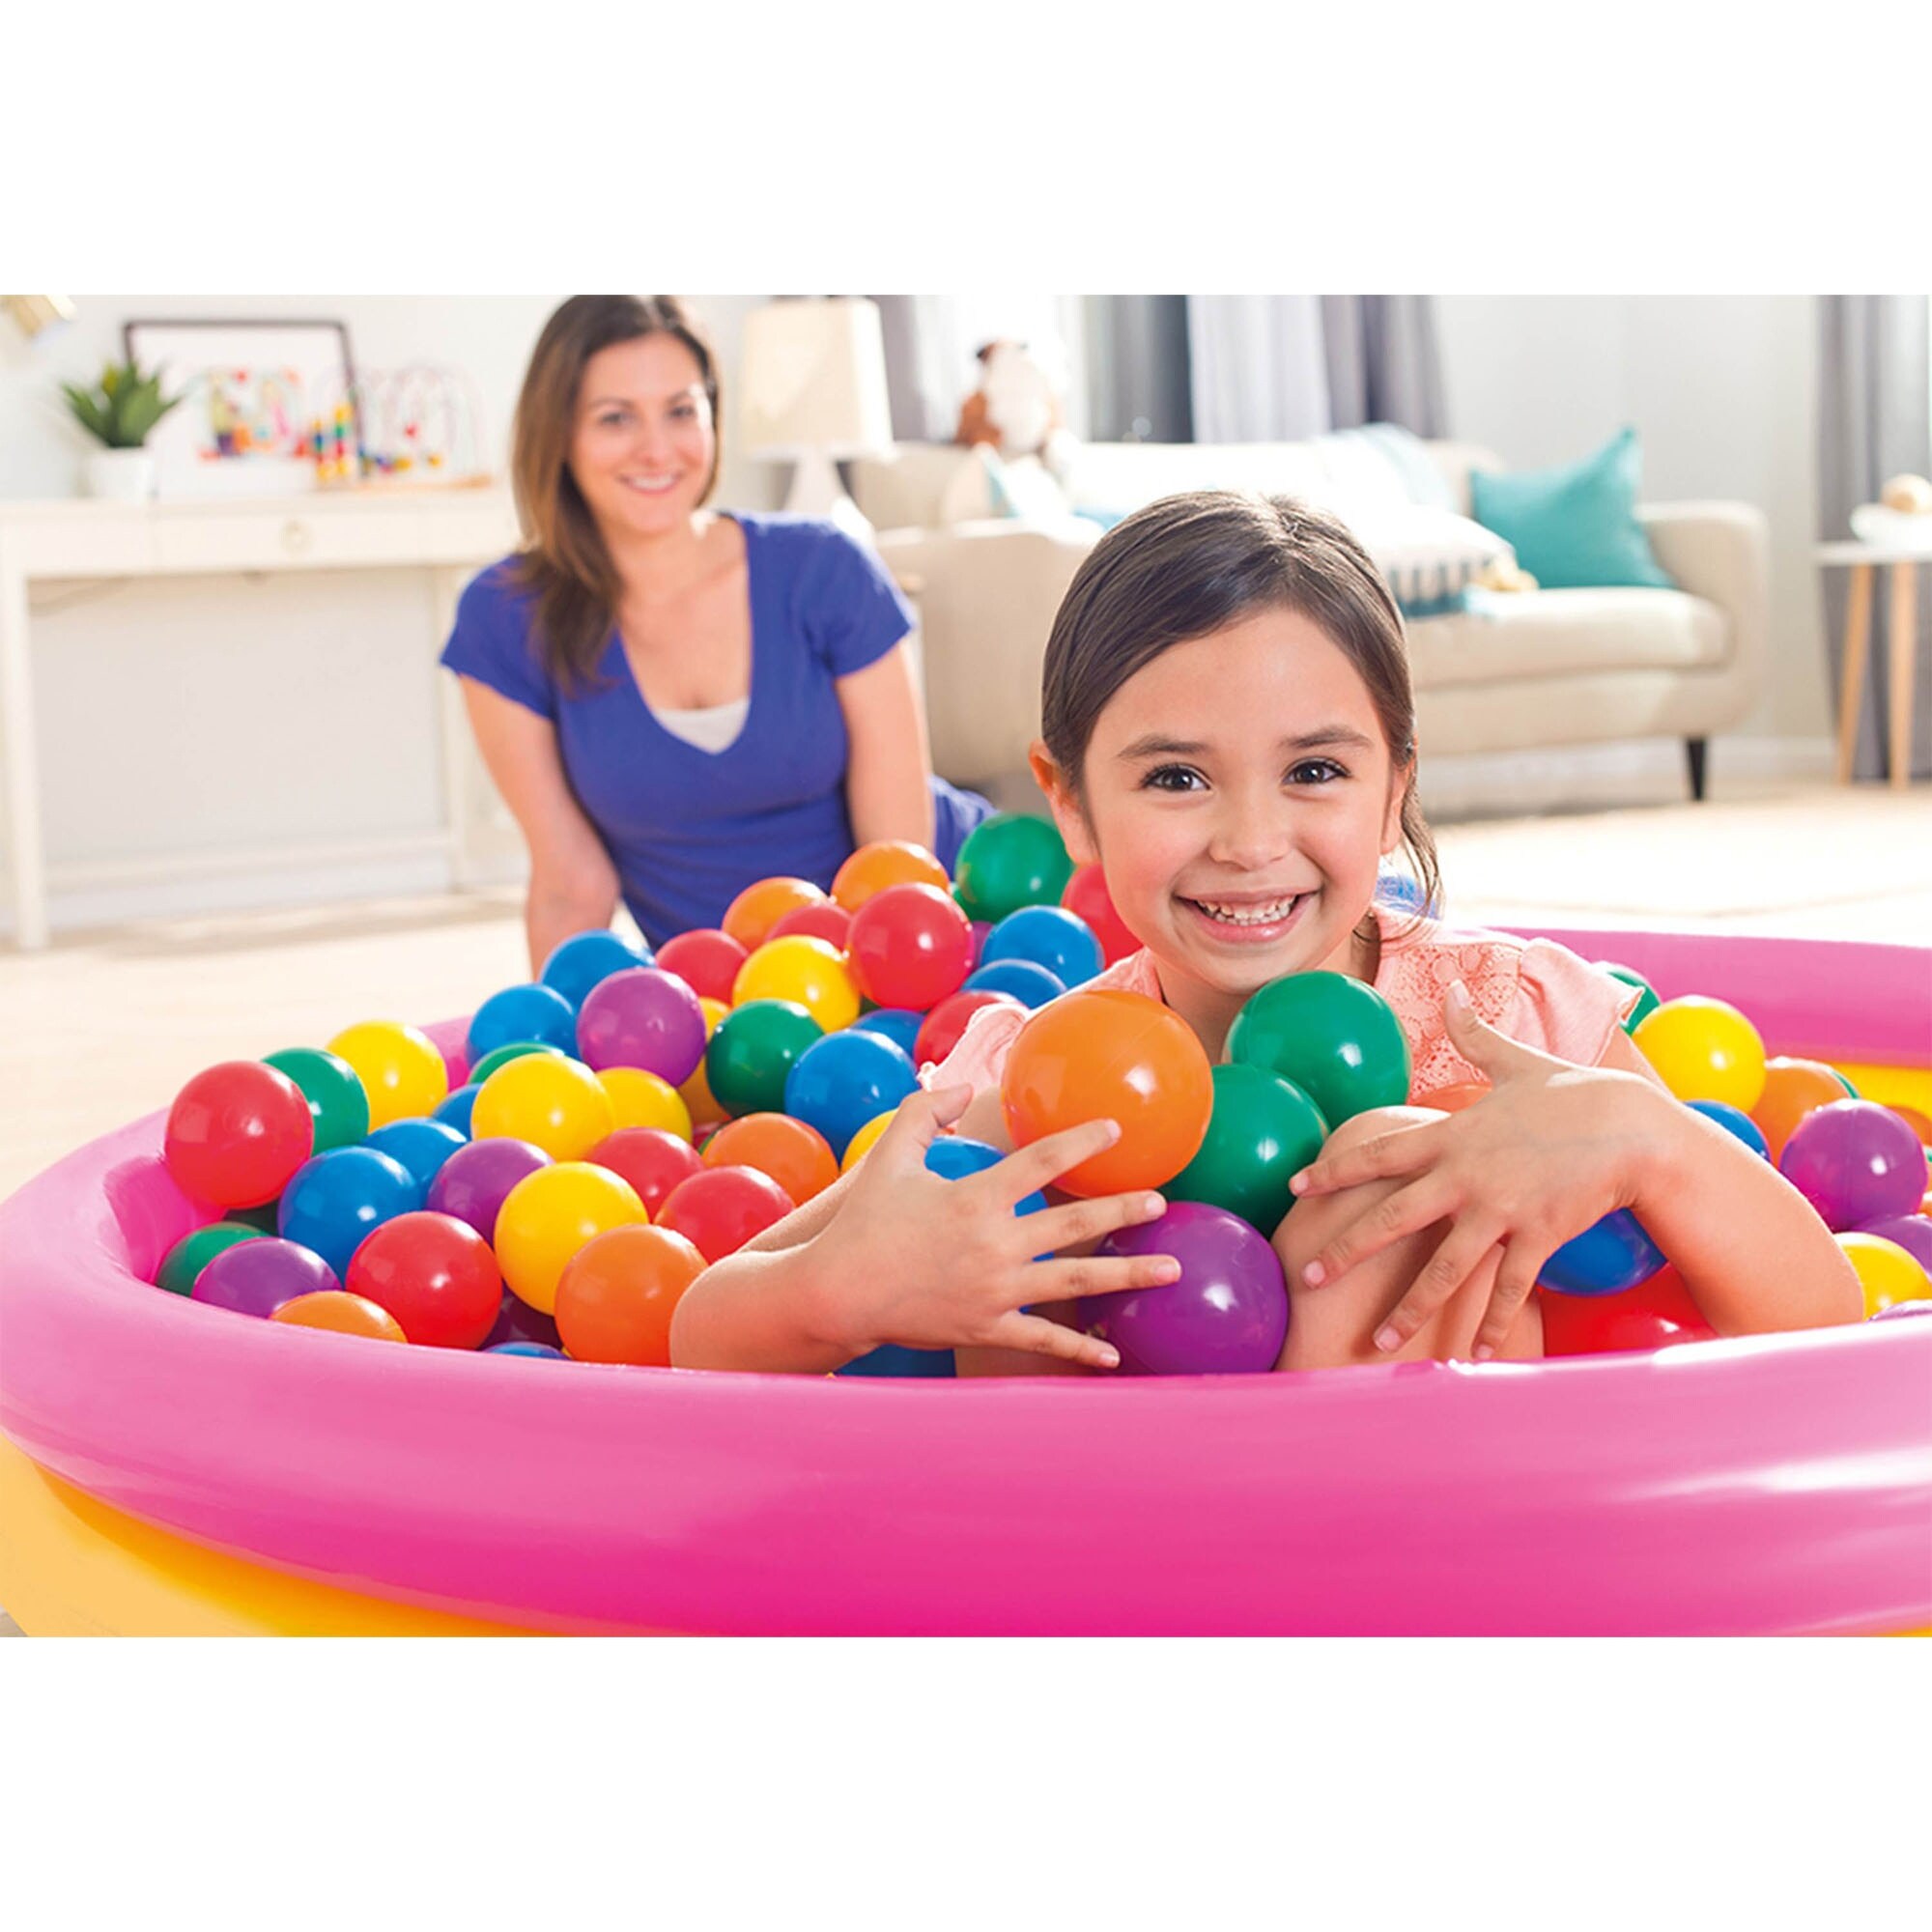 Intex 100-Pack Large Plastic Multi-Colored Fun Ballz For Ball Pits Bounce House - 2.6